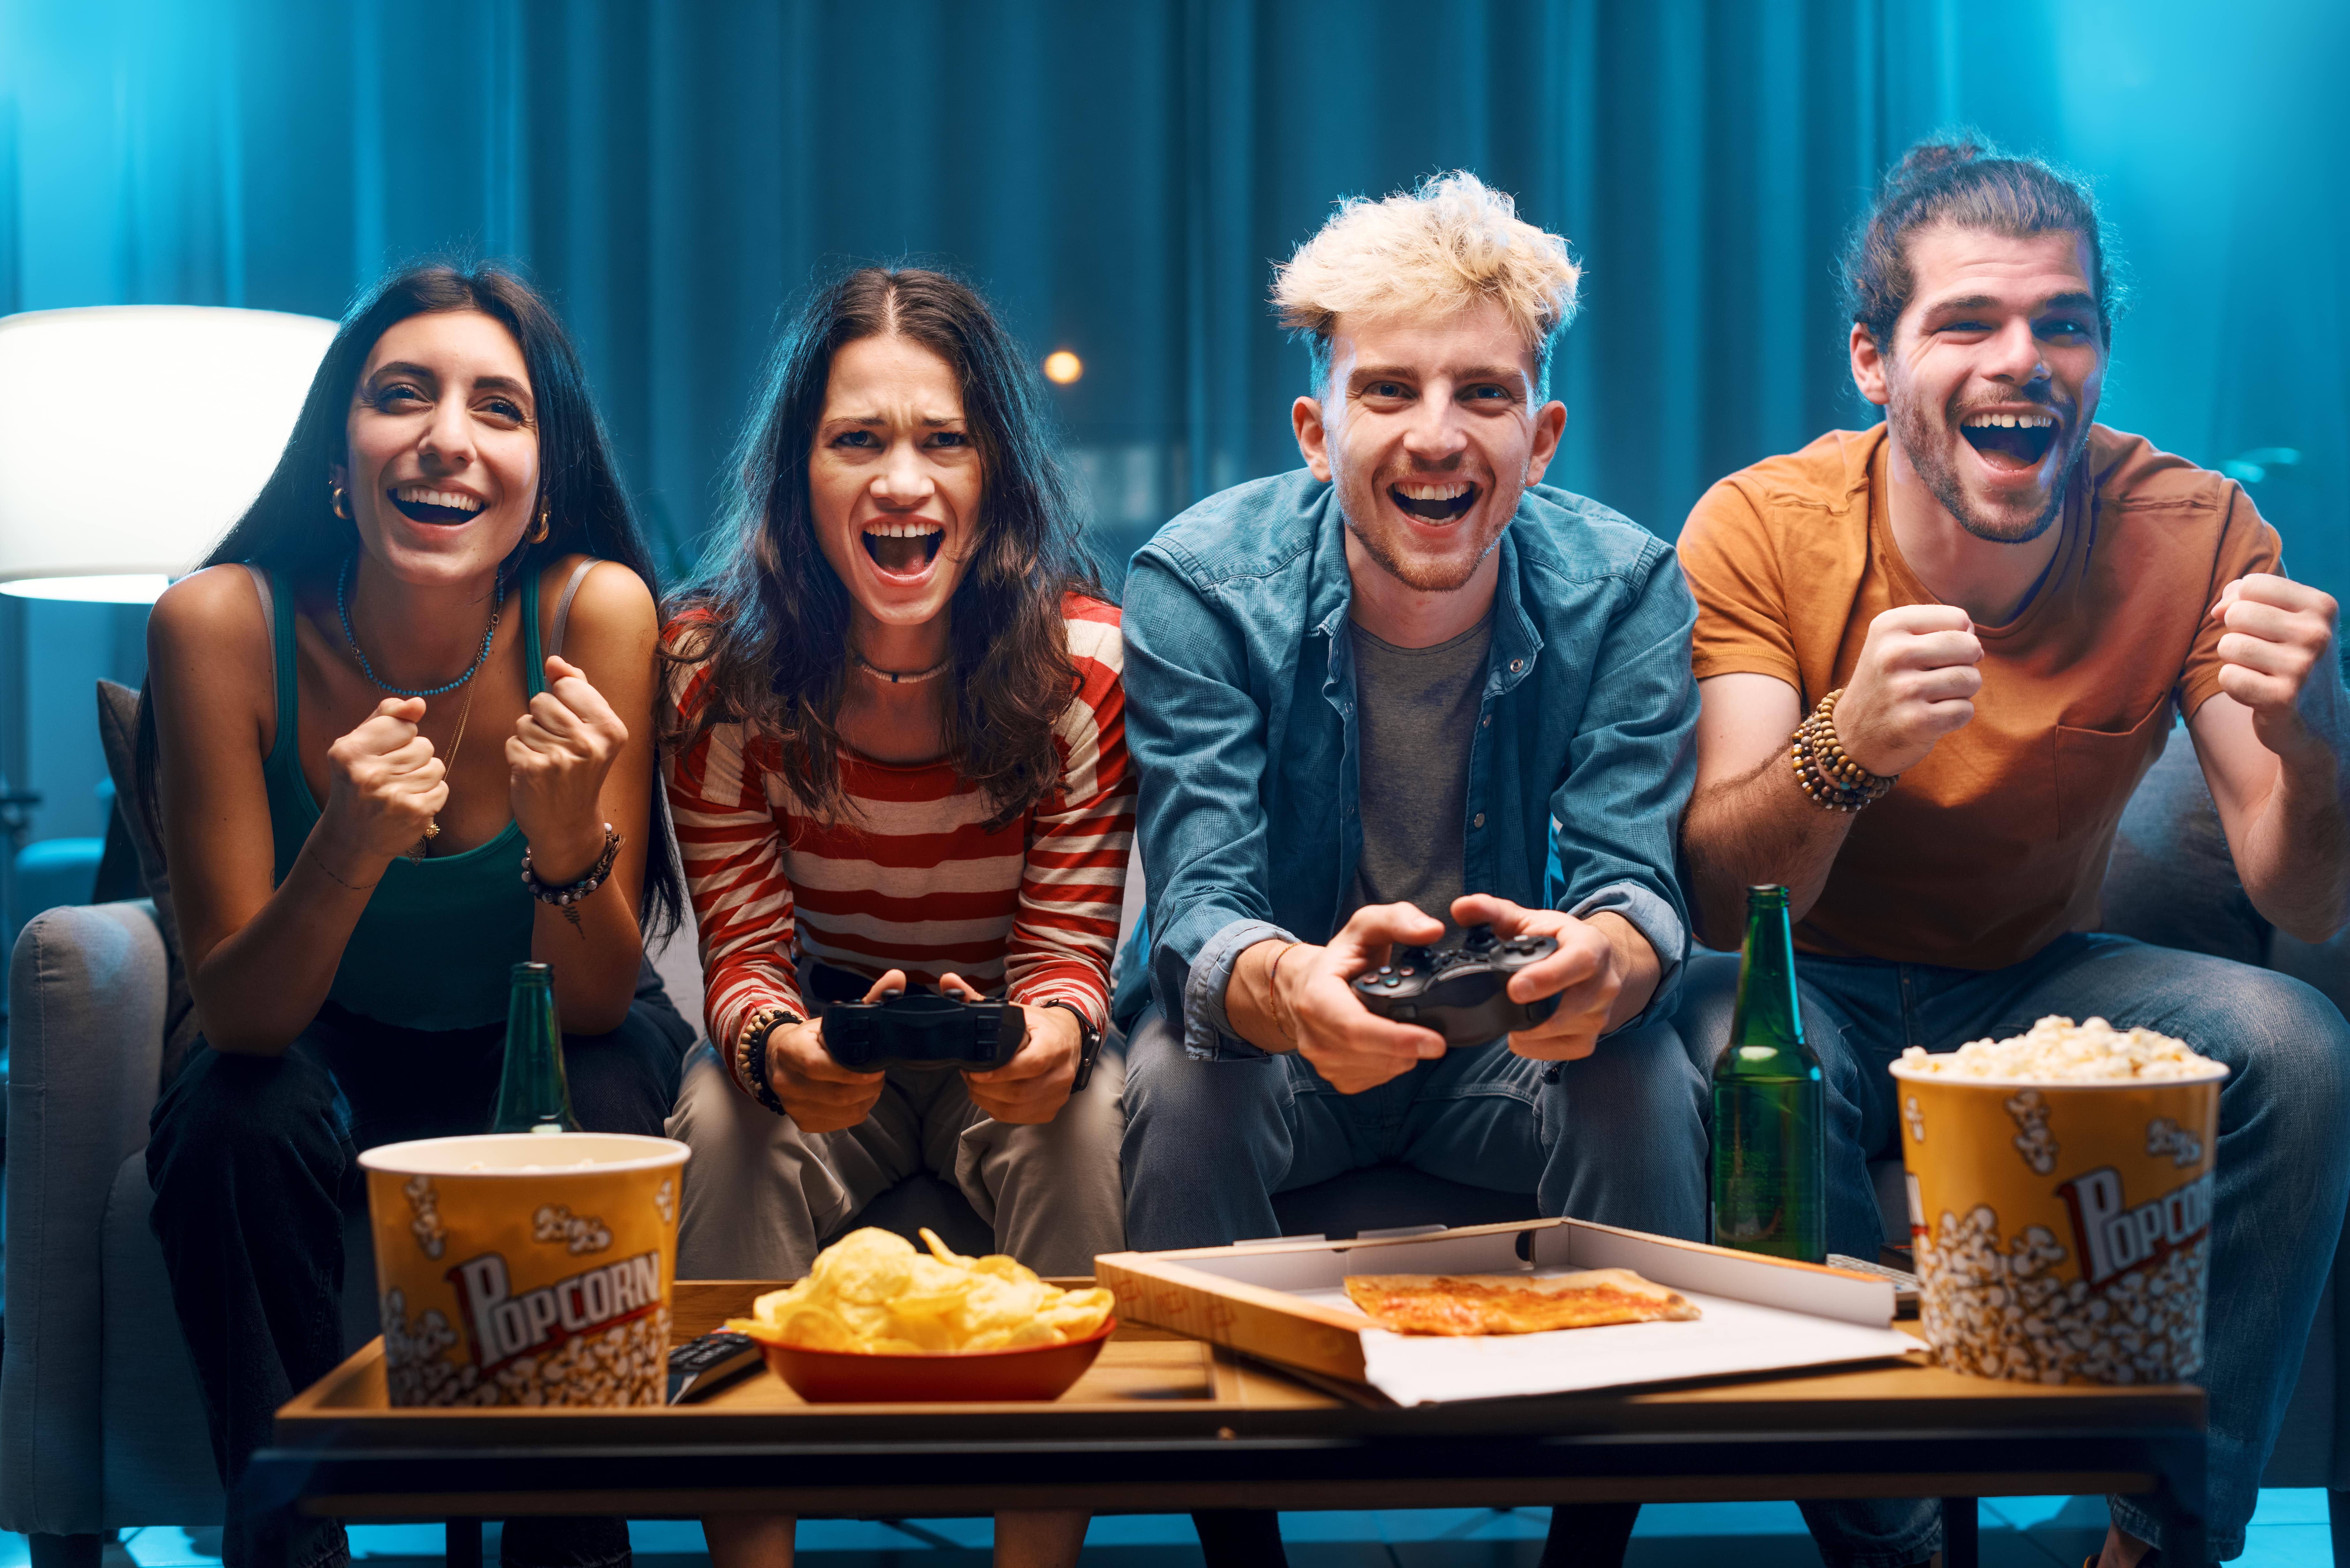 A group of four friends smiling and gaming together with pizza, popcorn, and beverages at the ready.